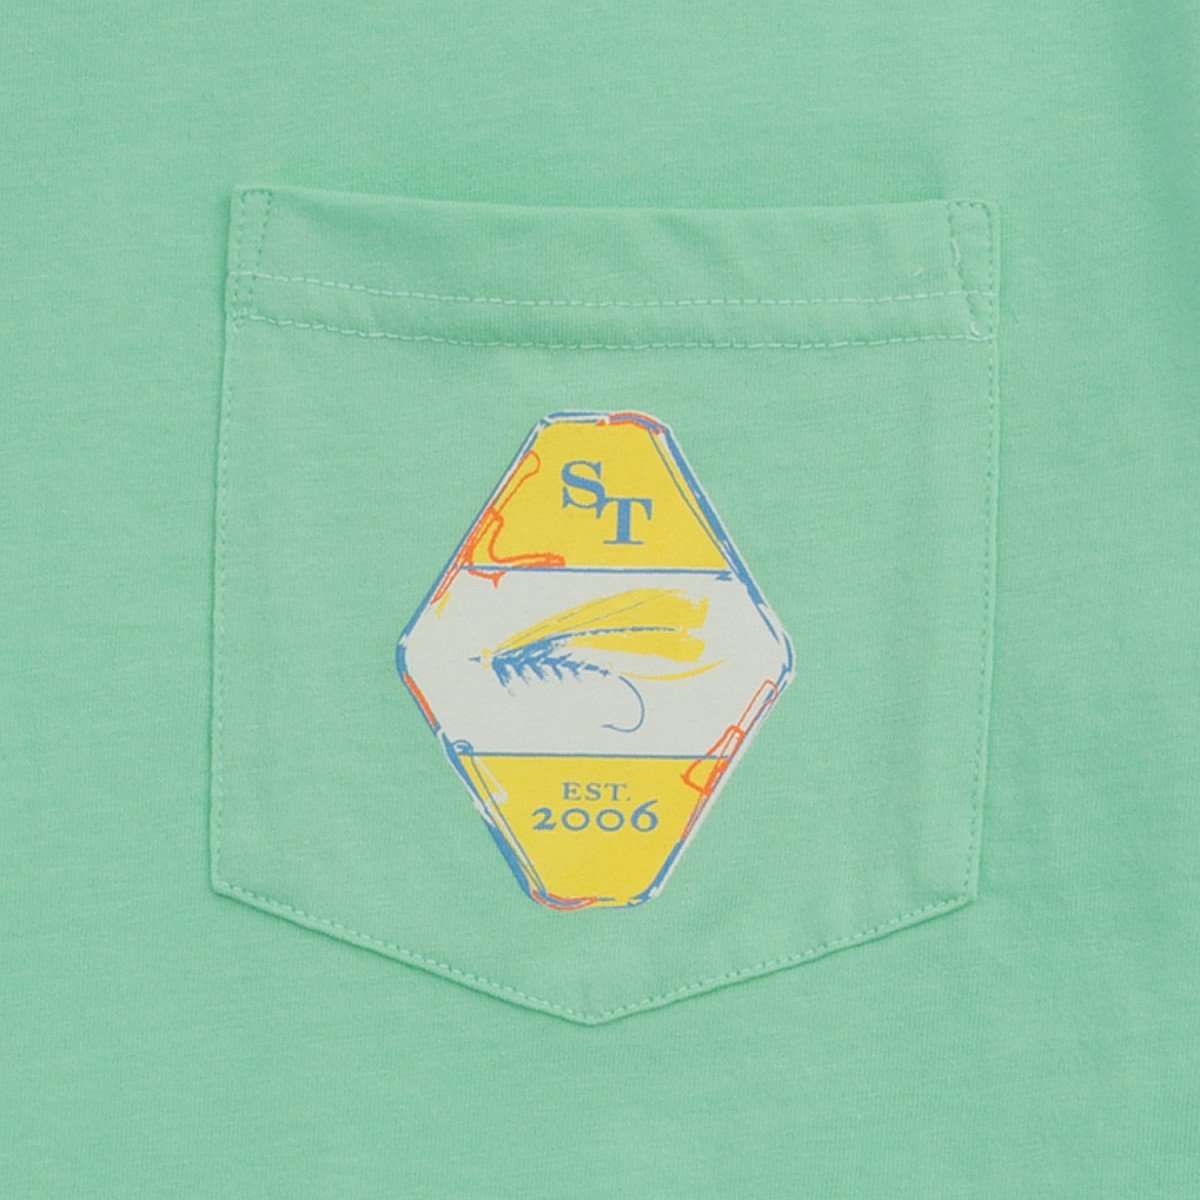 The Reel Deal Tee-Shirt in Starboard Green by Southern Tide - Country Club Prep